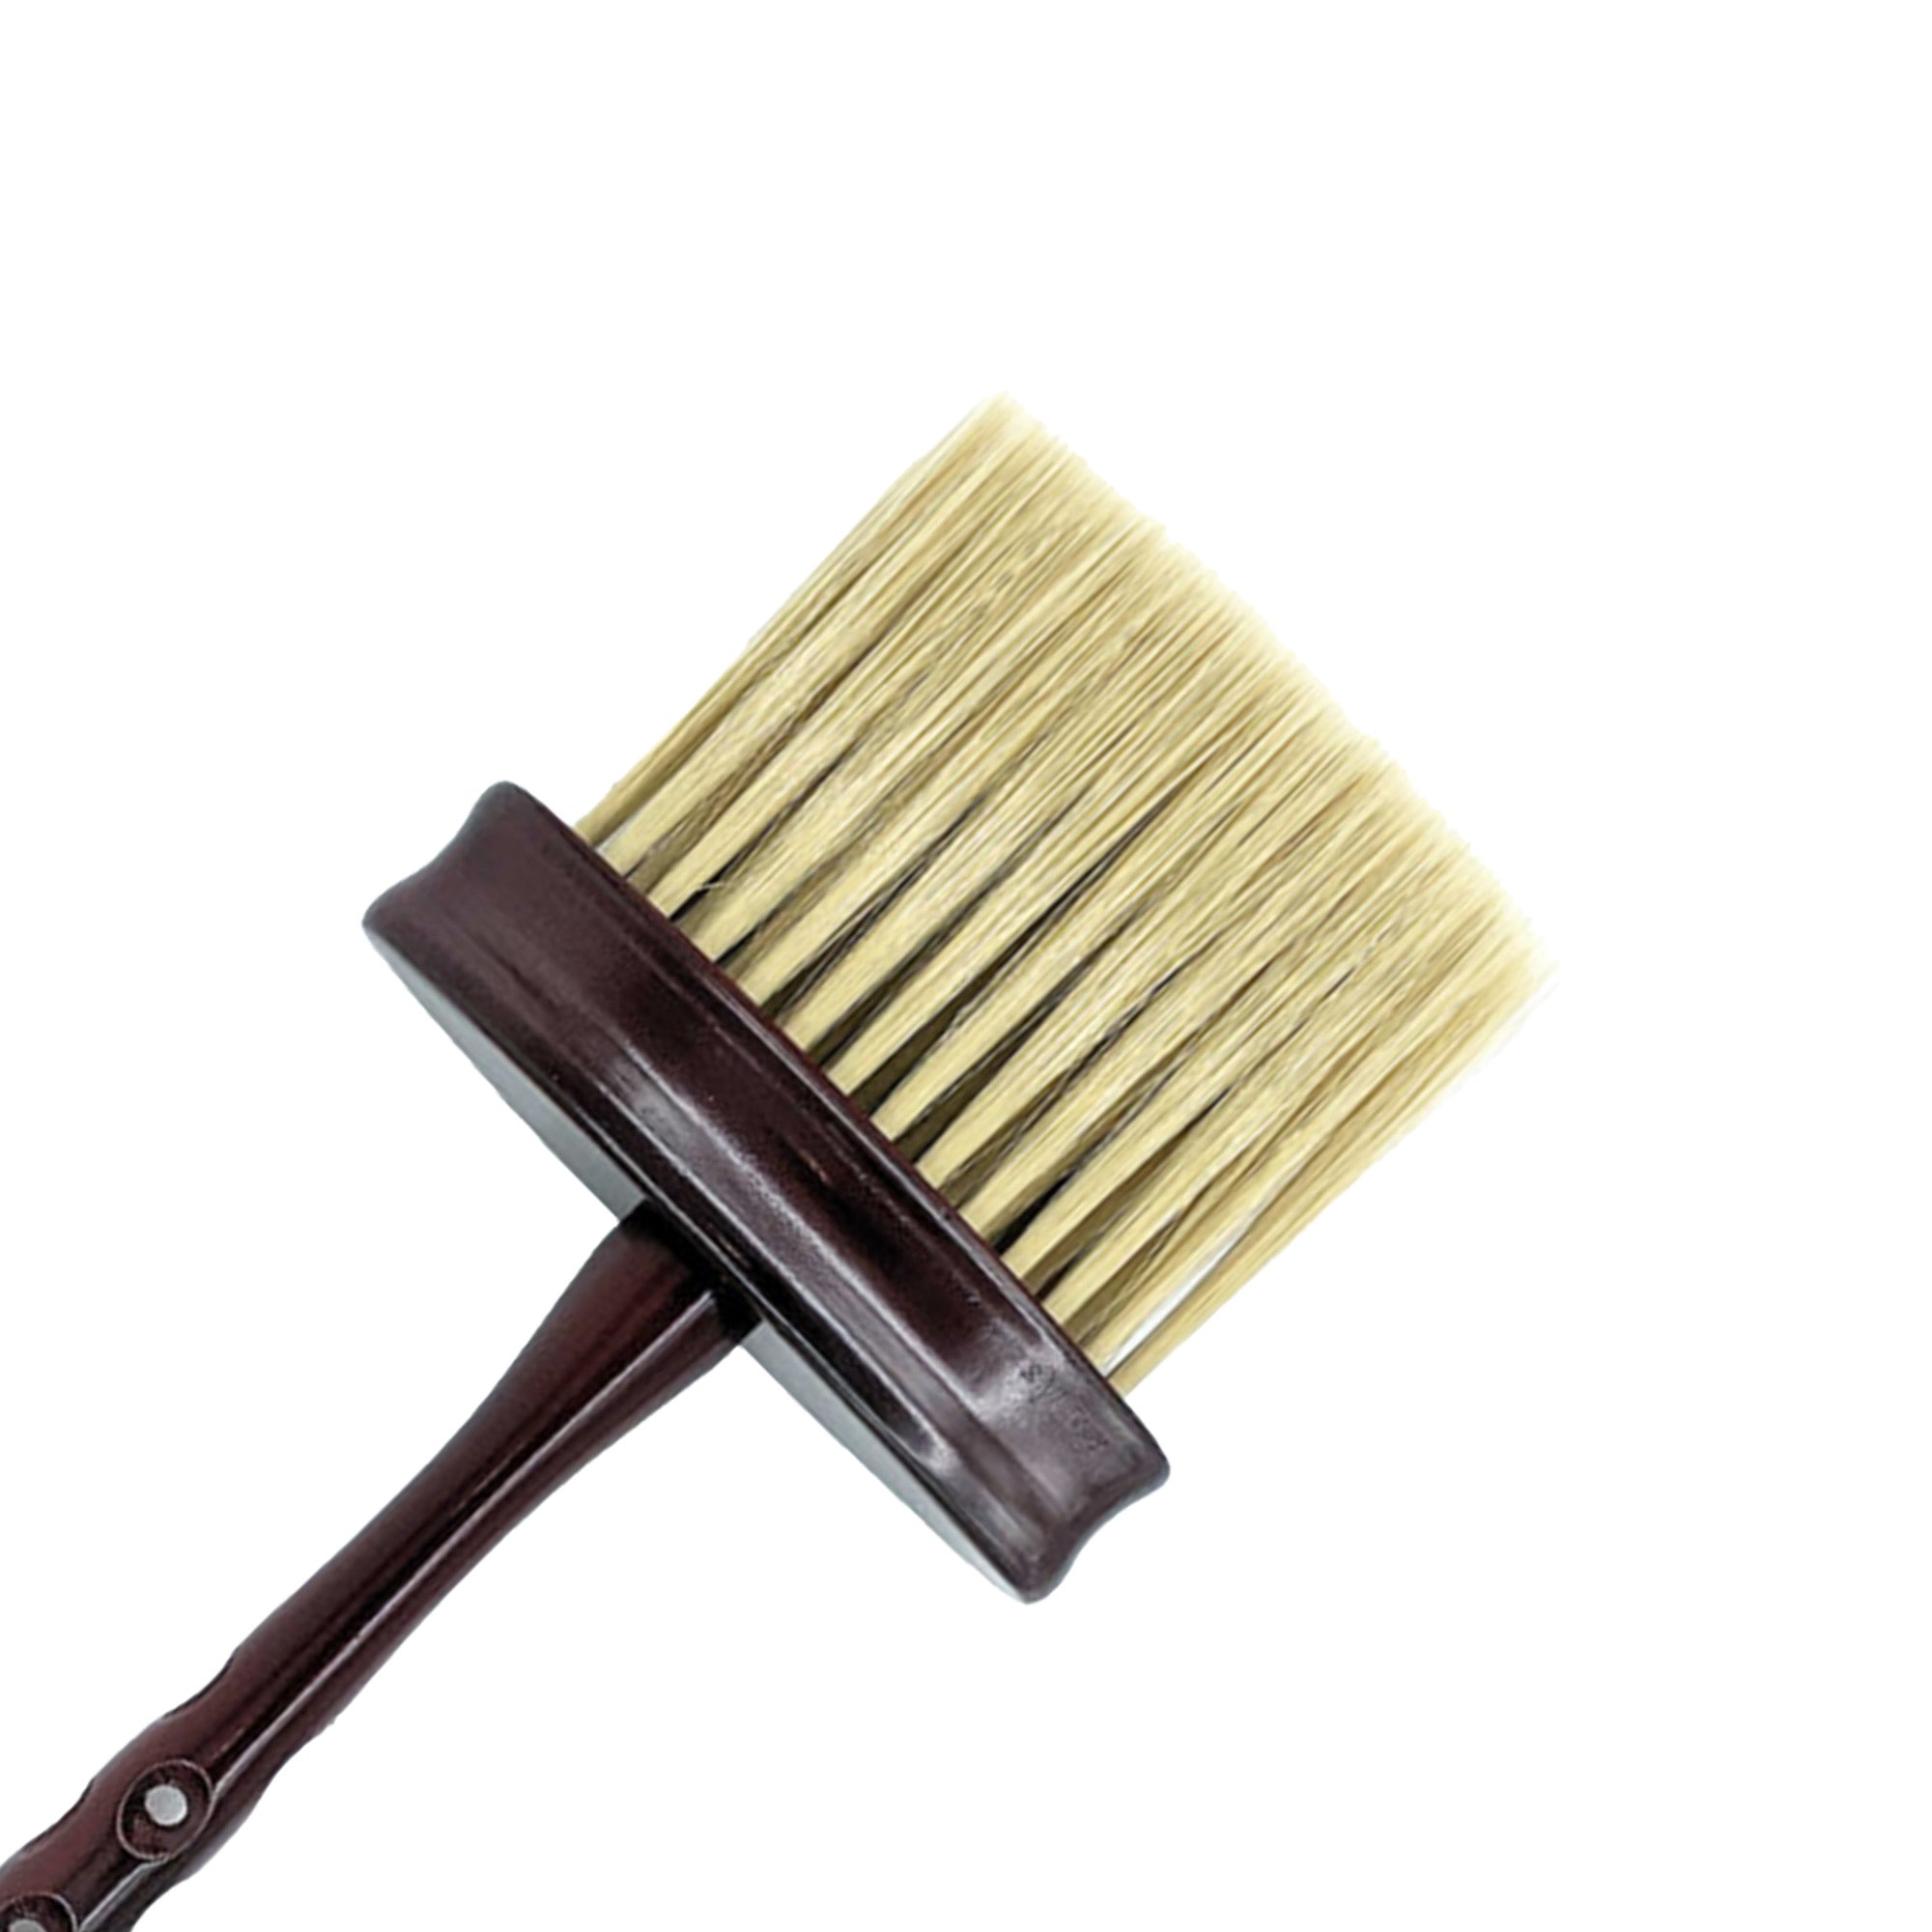 Eson - Long Handle Wooden Neck Duster Brush 25x10cm (Brown)